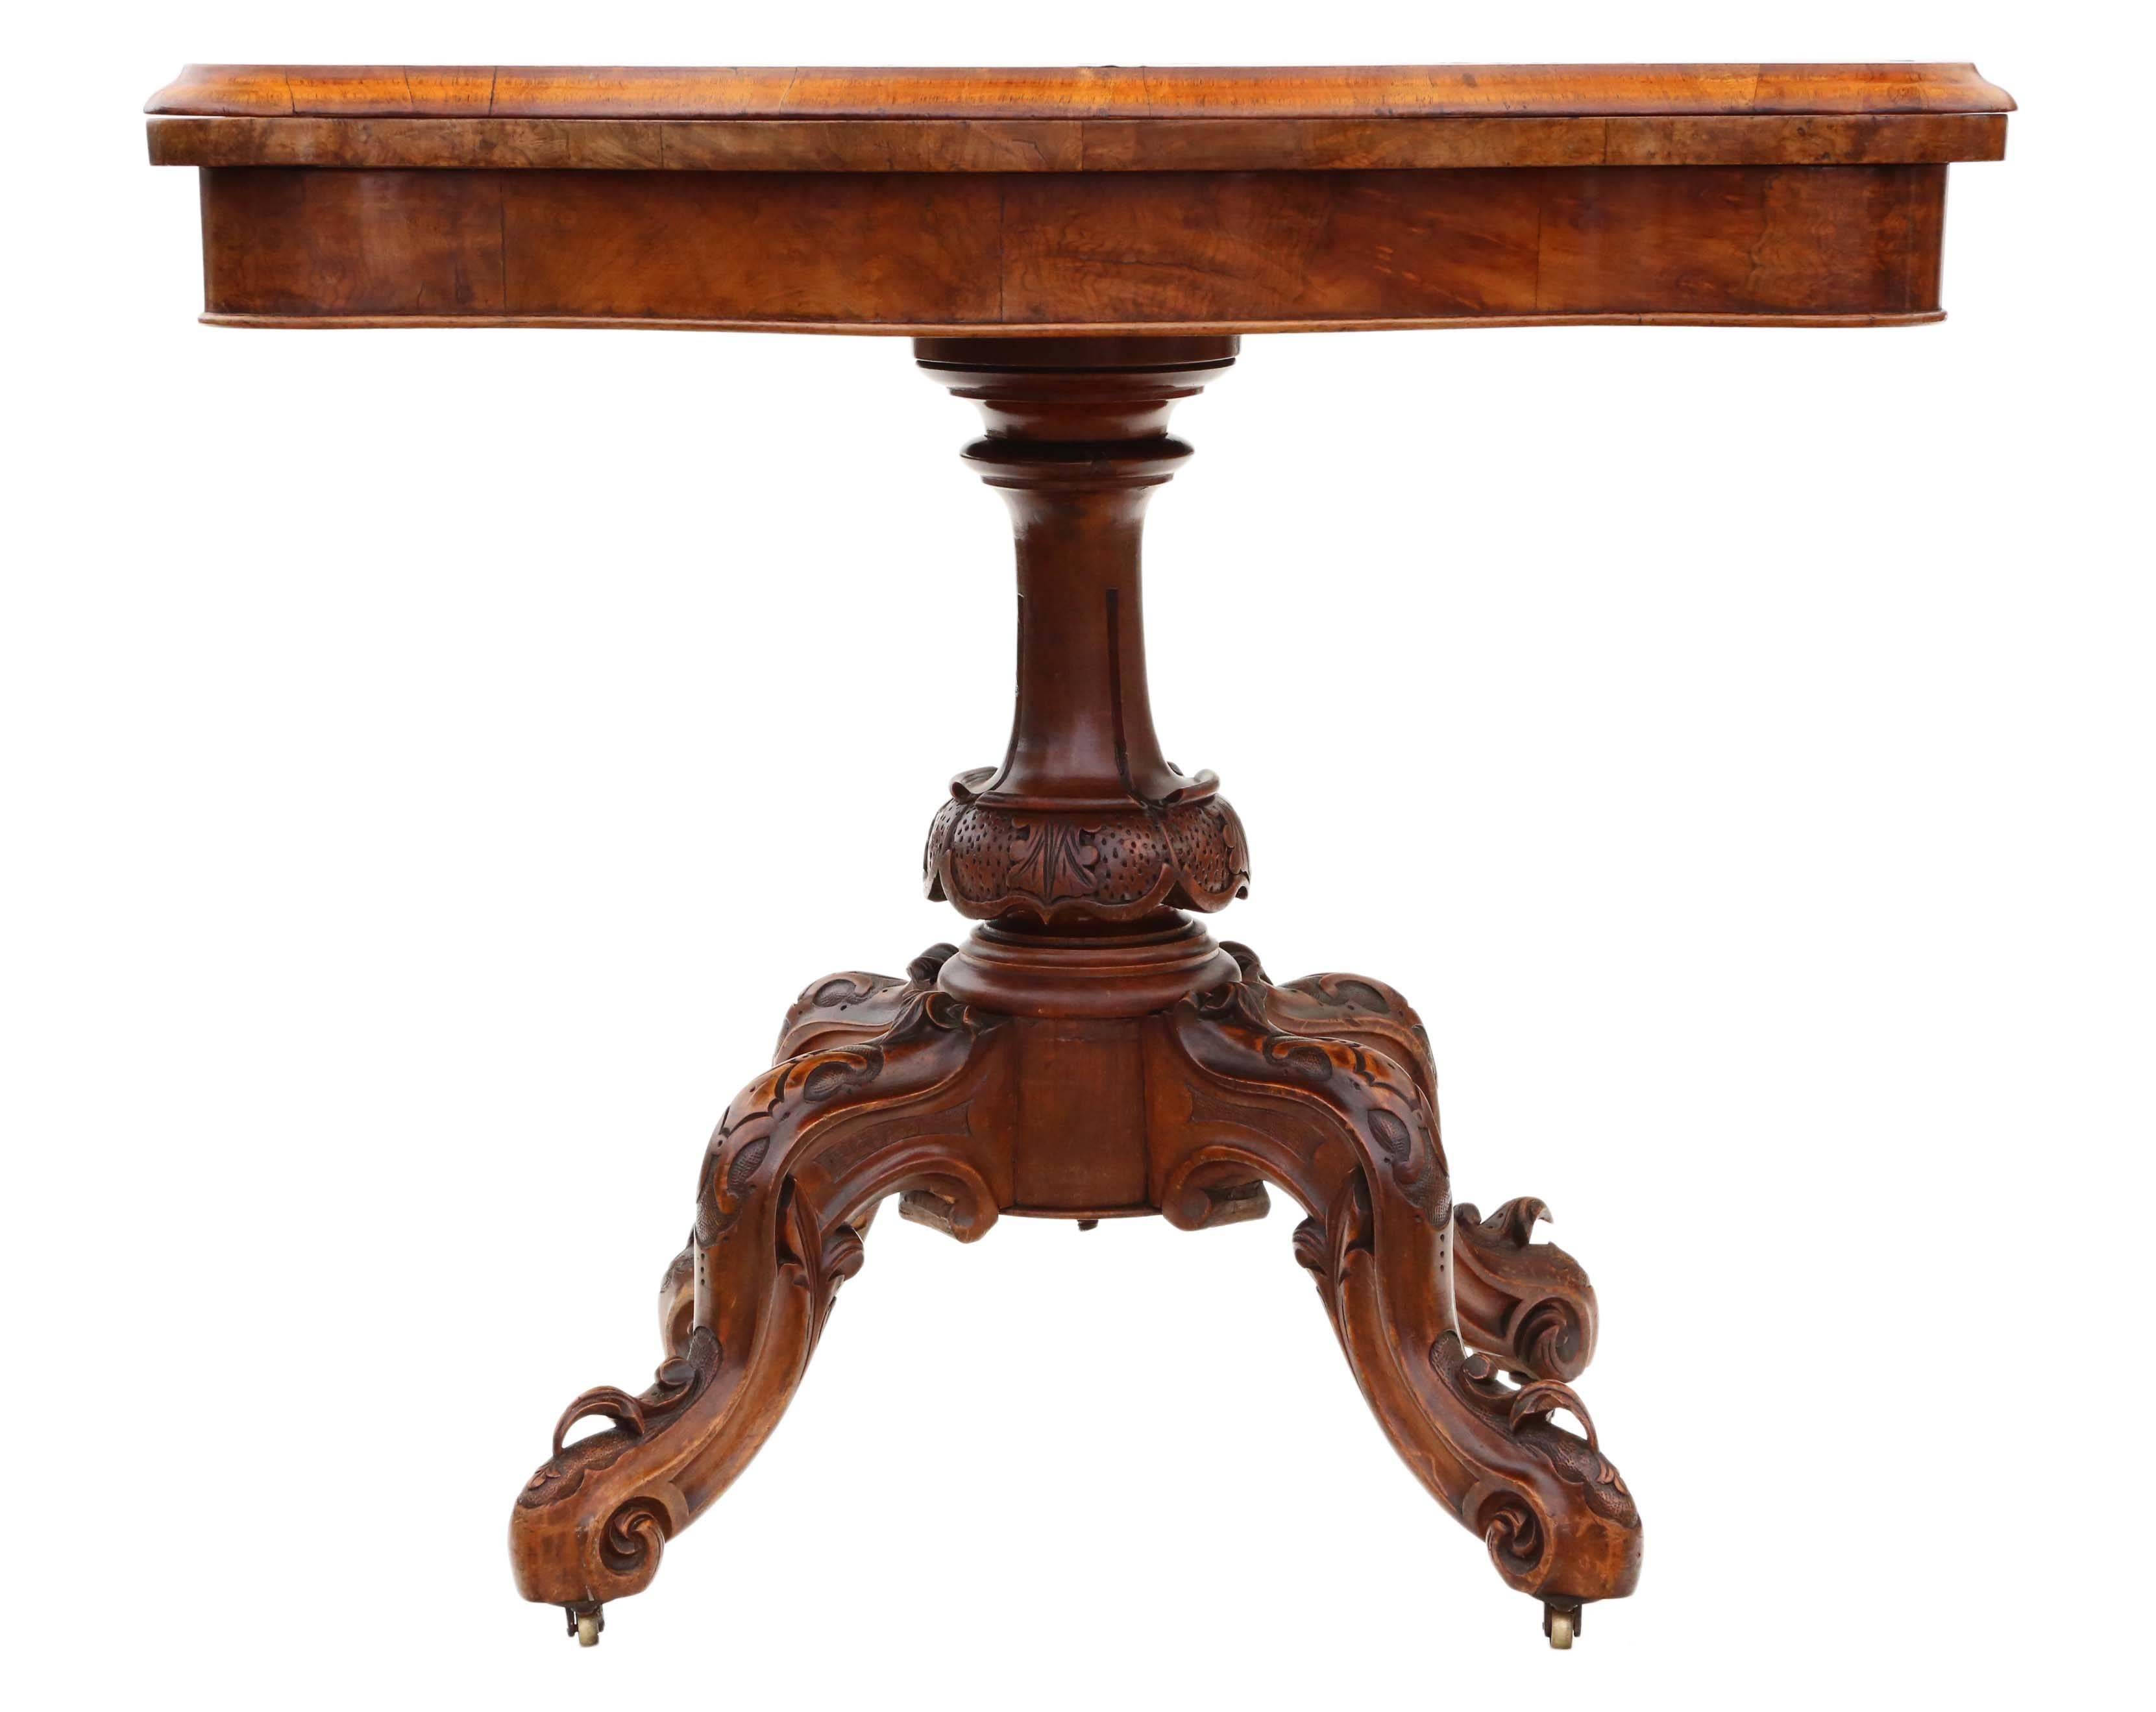 Antique quality Victorian circa 1870 burr walnut serpentine folding card table.

Solid and strong, with no loose joints. Full of age, character and charm. Attractive carved pedestal base with period brass castors. Baise is old, but in good